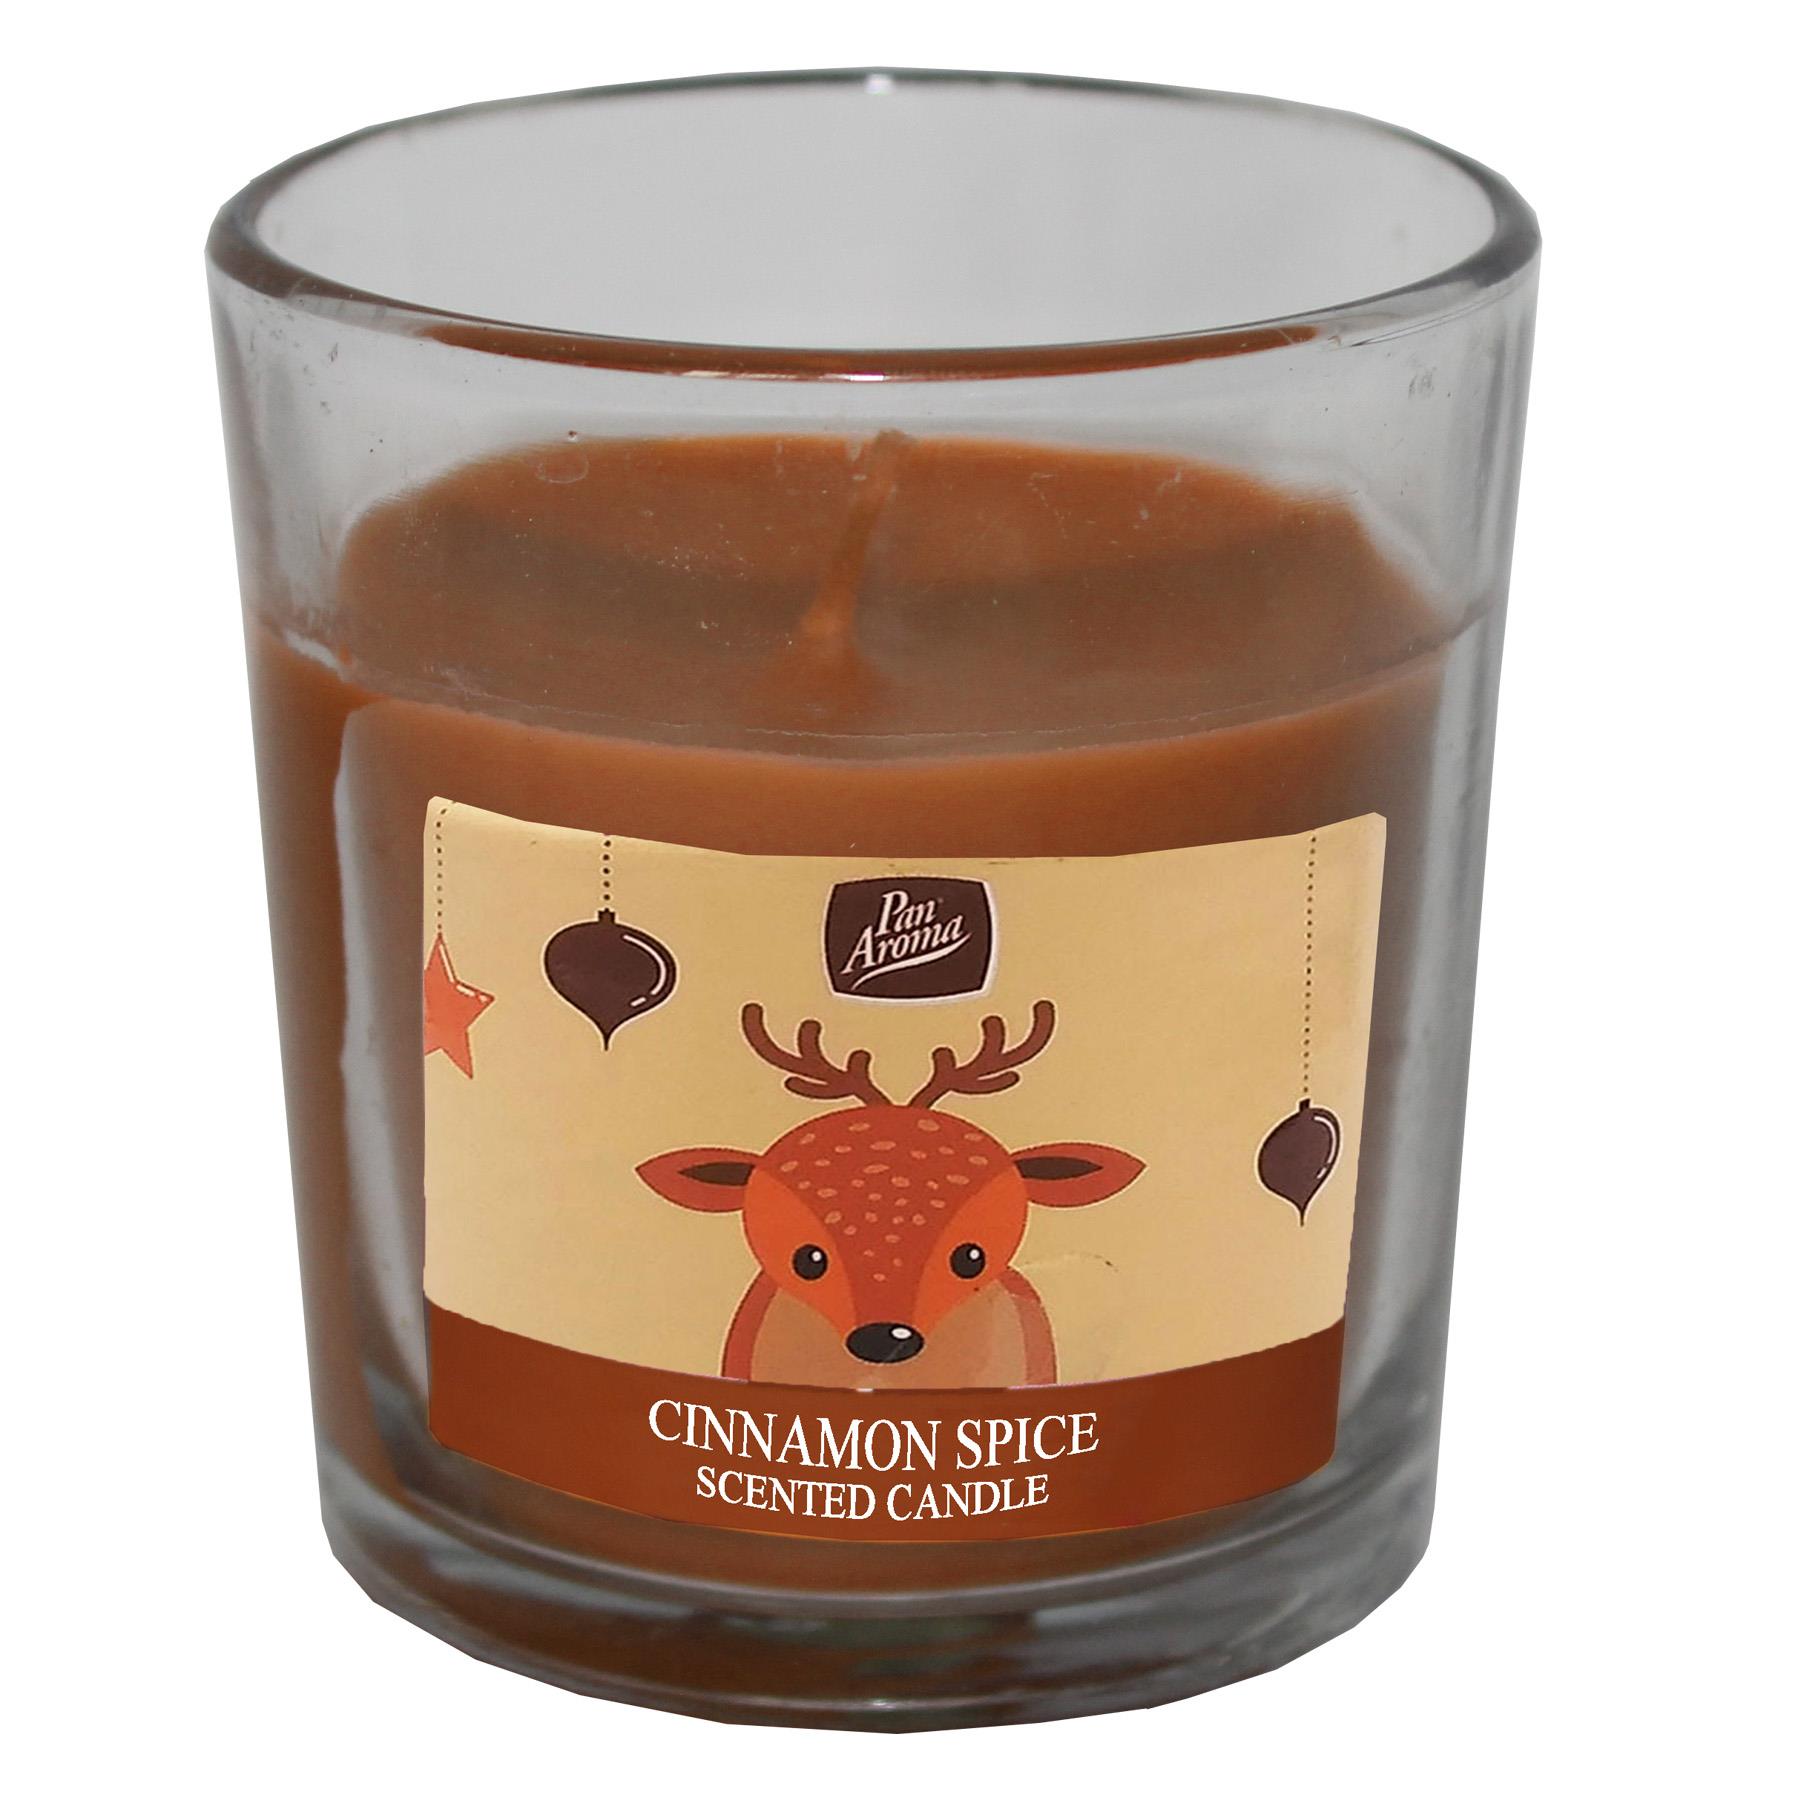 Christmas Scented Candle in Glass Jar Pan Aroma Cinnamon Spice